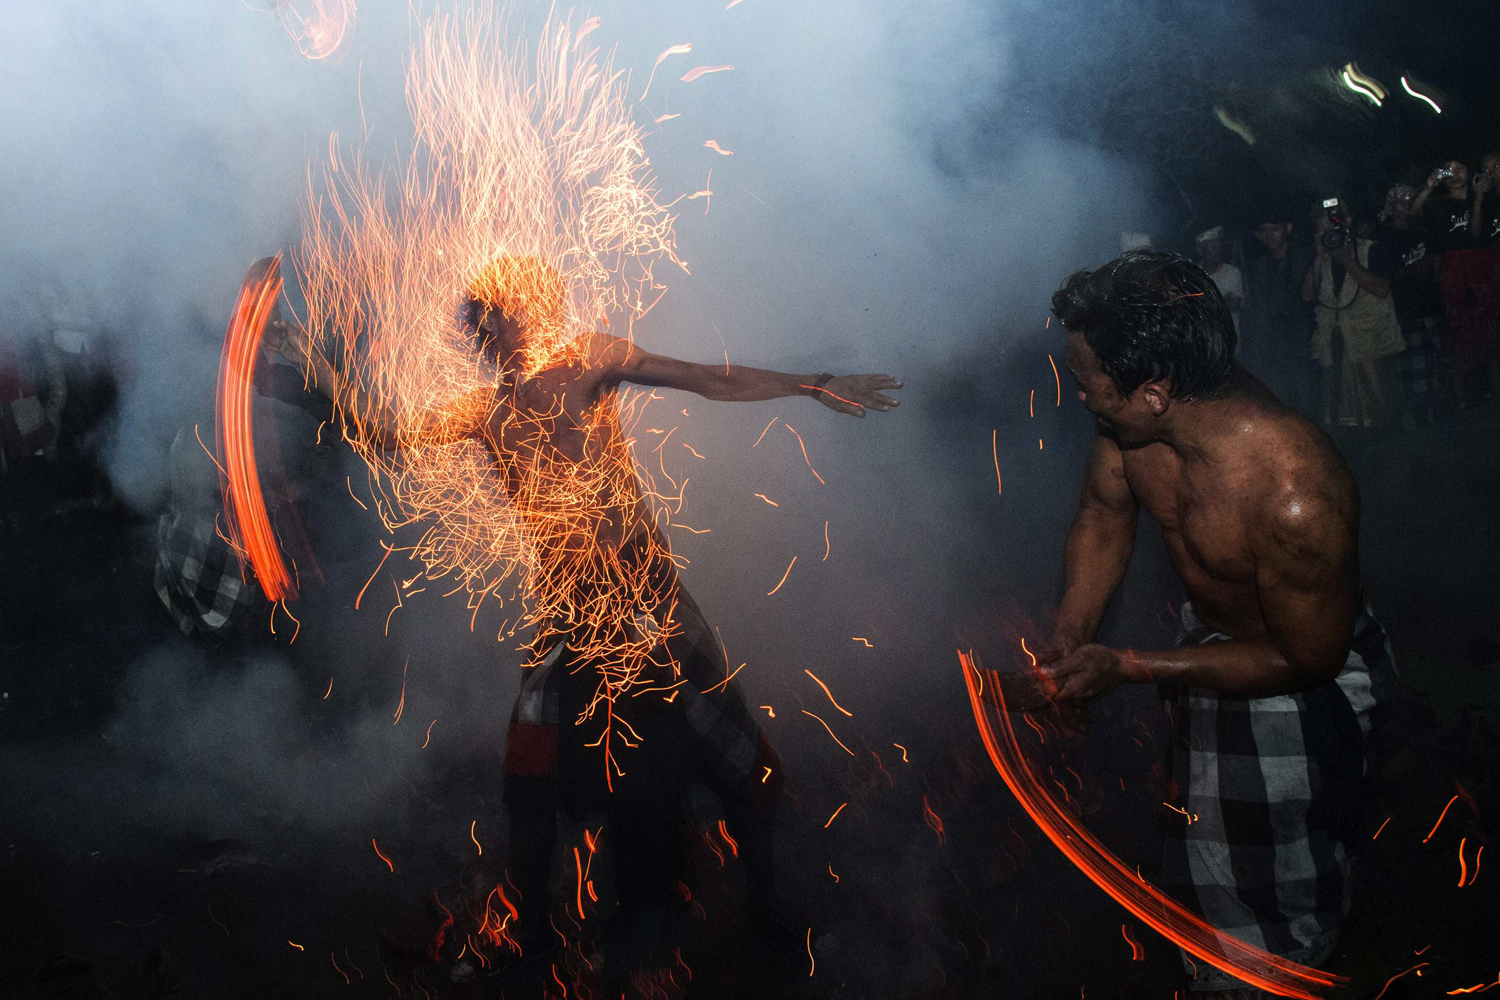 Balinese hit each other with fire during the "Perang Api" ritual ahead of Nyepi day in Gianyar, Bali